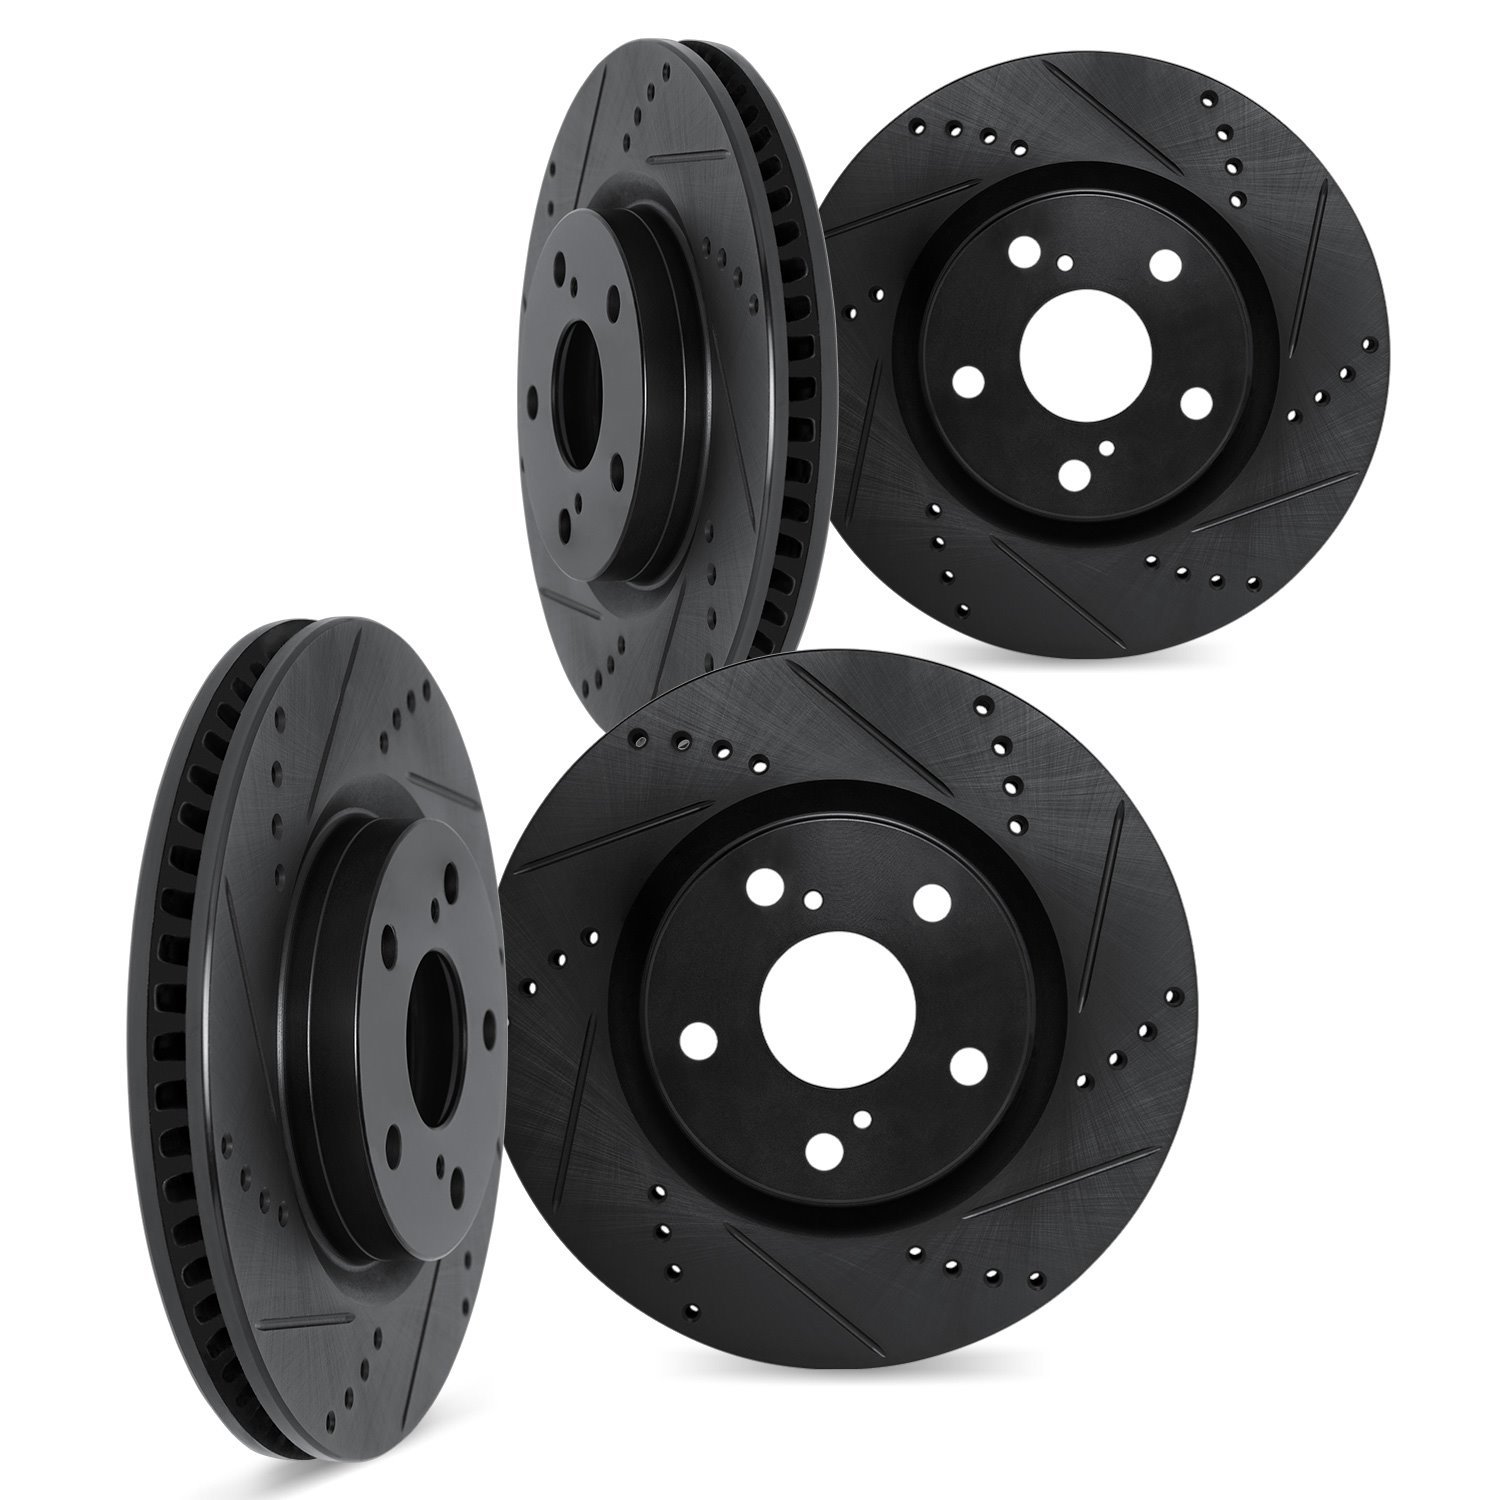 8004-01009 Drilled/Slotted Brake Rotors [Black], 2009-2017 Suzuki, Position: Front and Rear